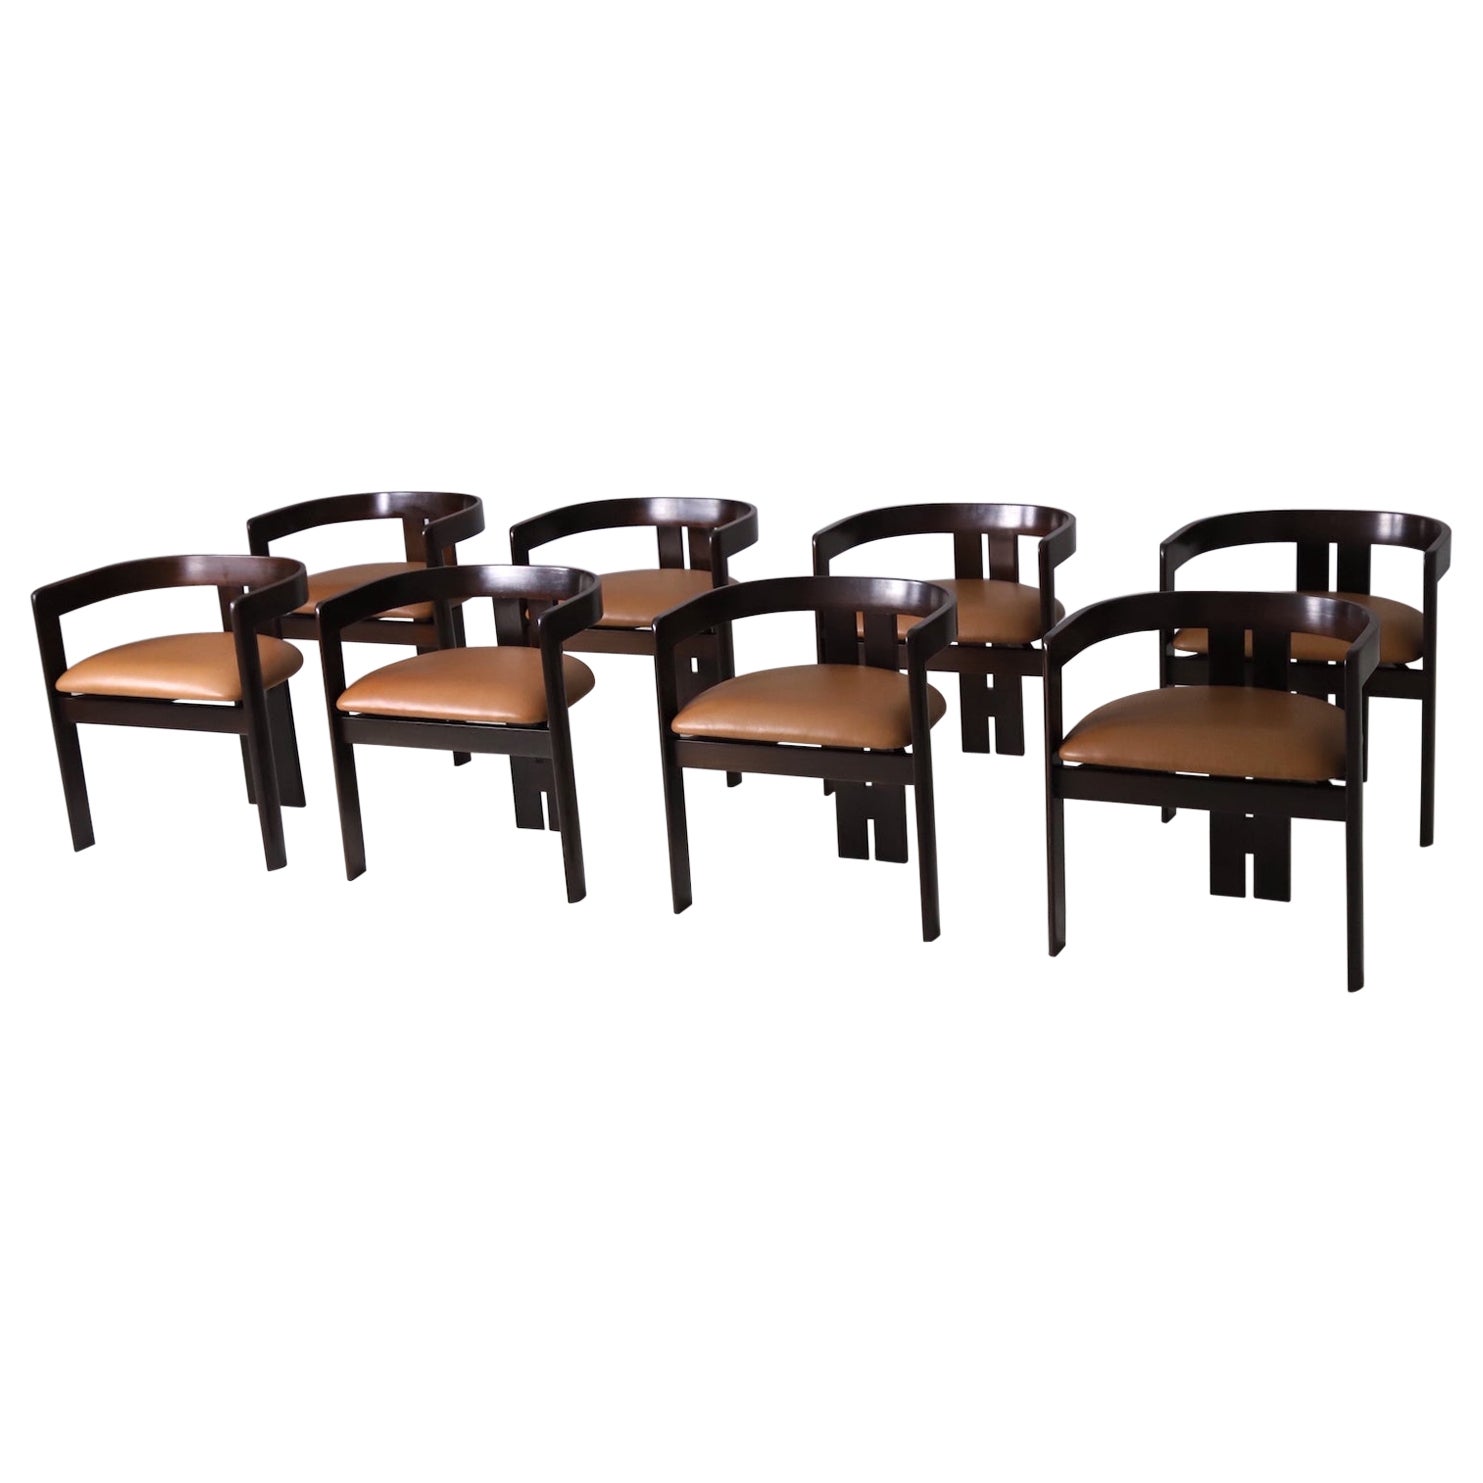 Set of 8 'Pigreco' dining chairs by Tobia Scarpa for Gavina, Italy 1960s For Sale